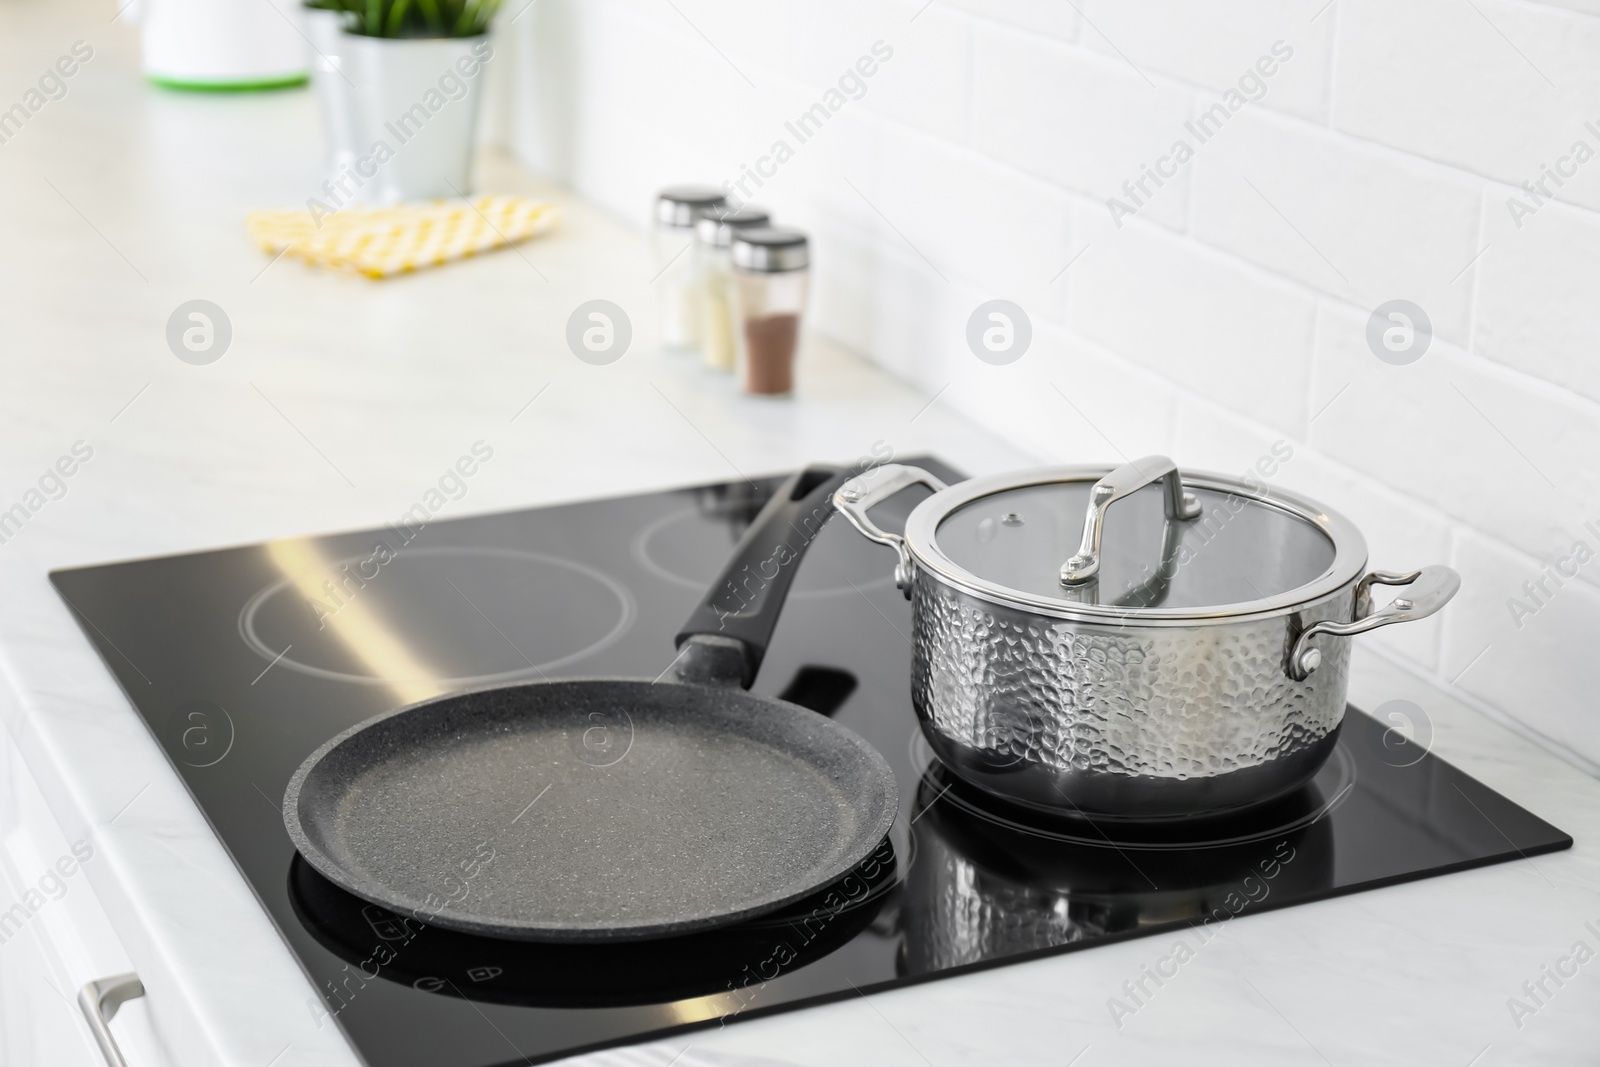 Photo of Pot and frying pan on stove in kitchen